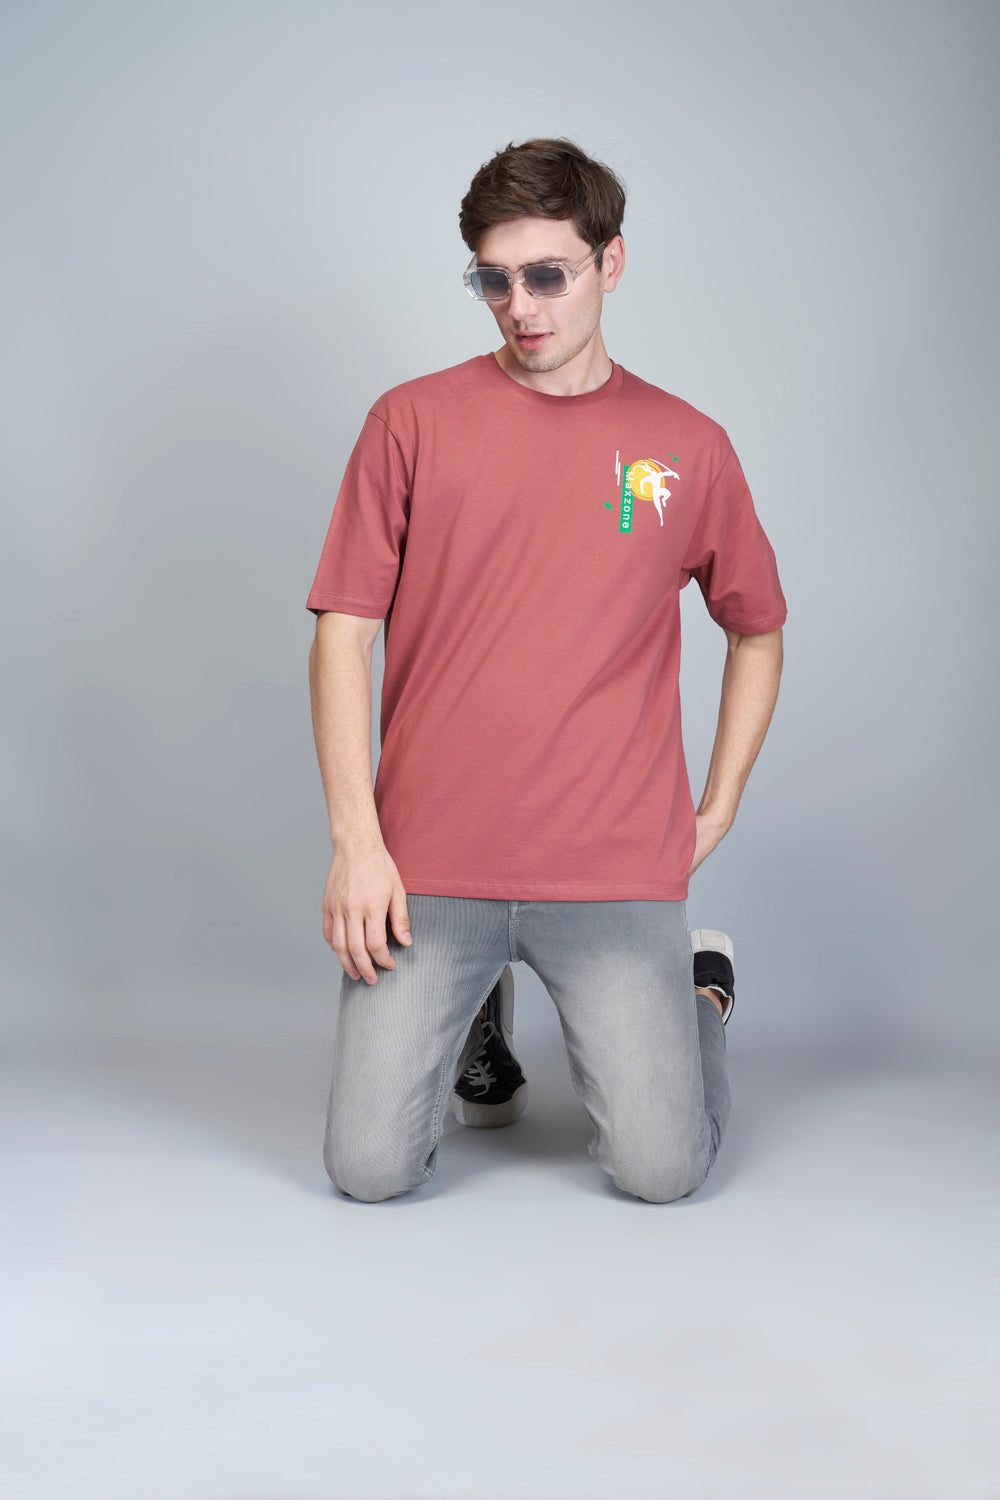 Cotton oversized T shirt for men in the solid color Rose Gold with half sleeves and crew neck.